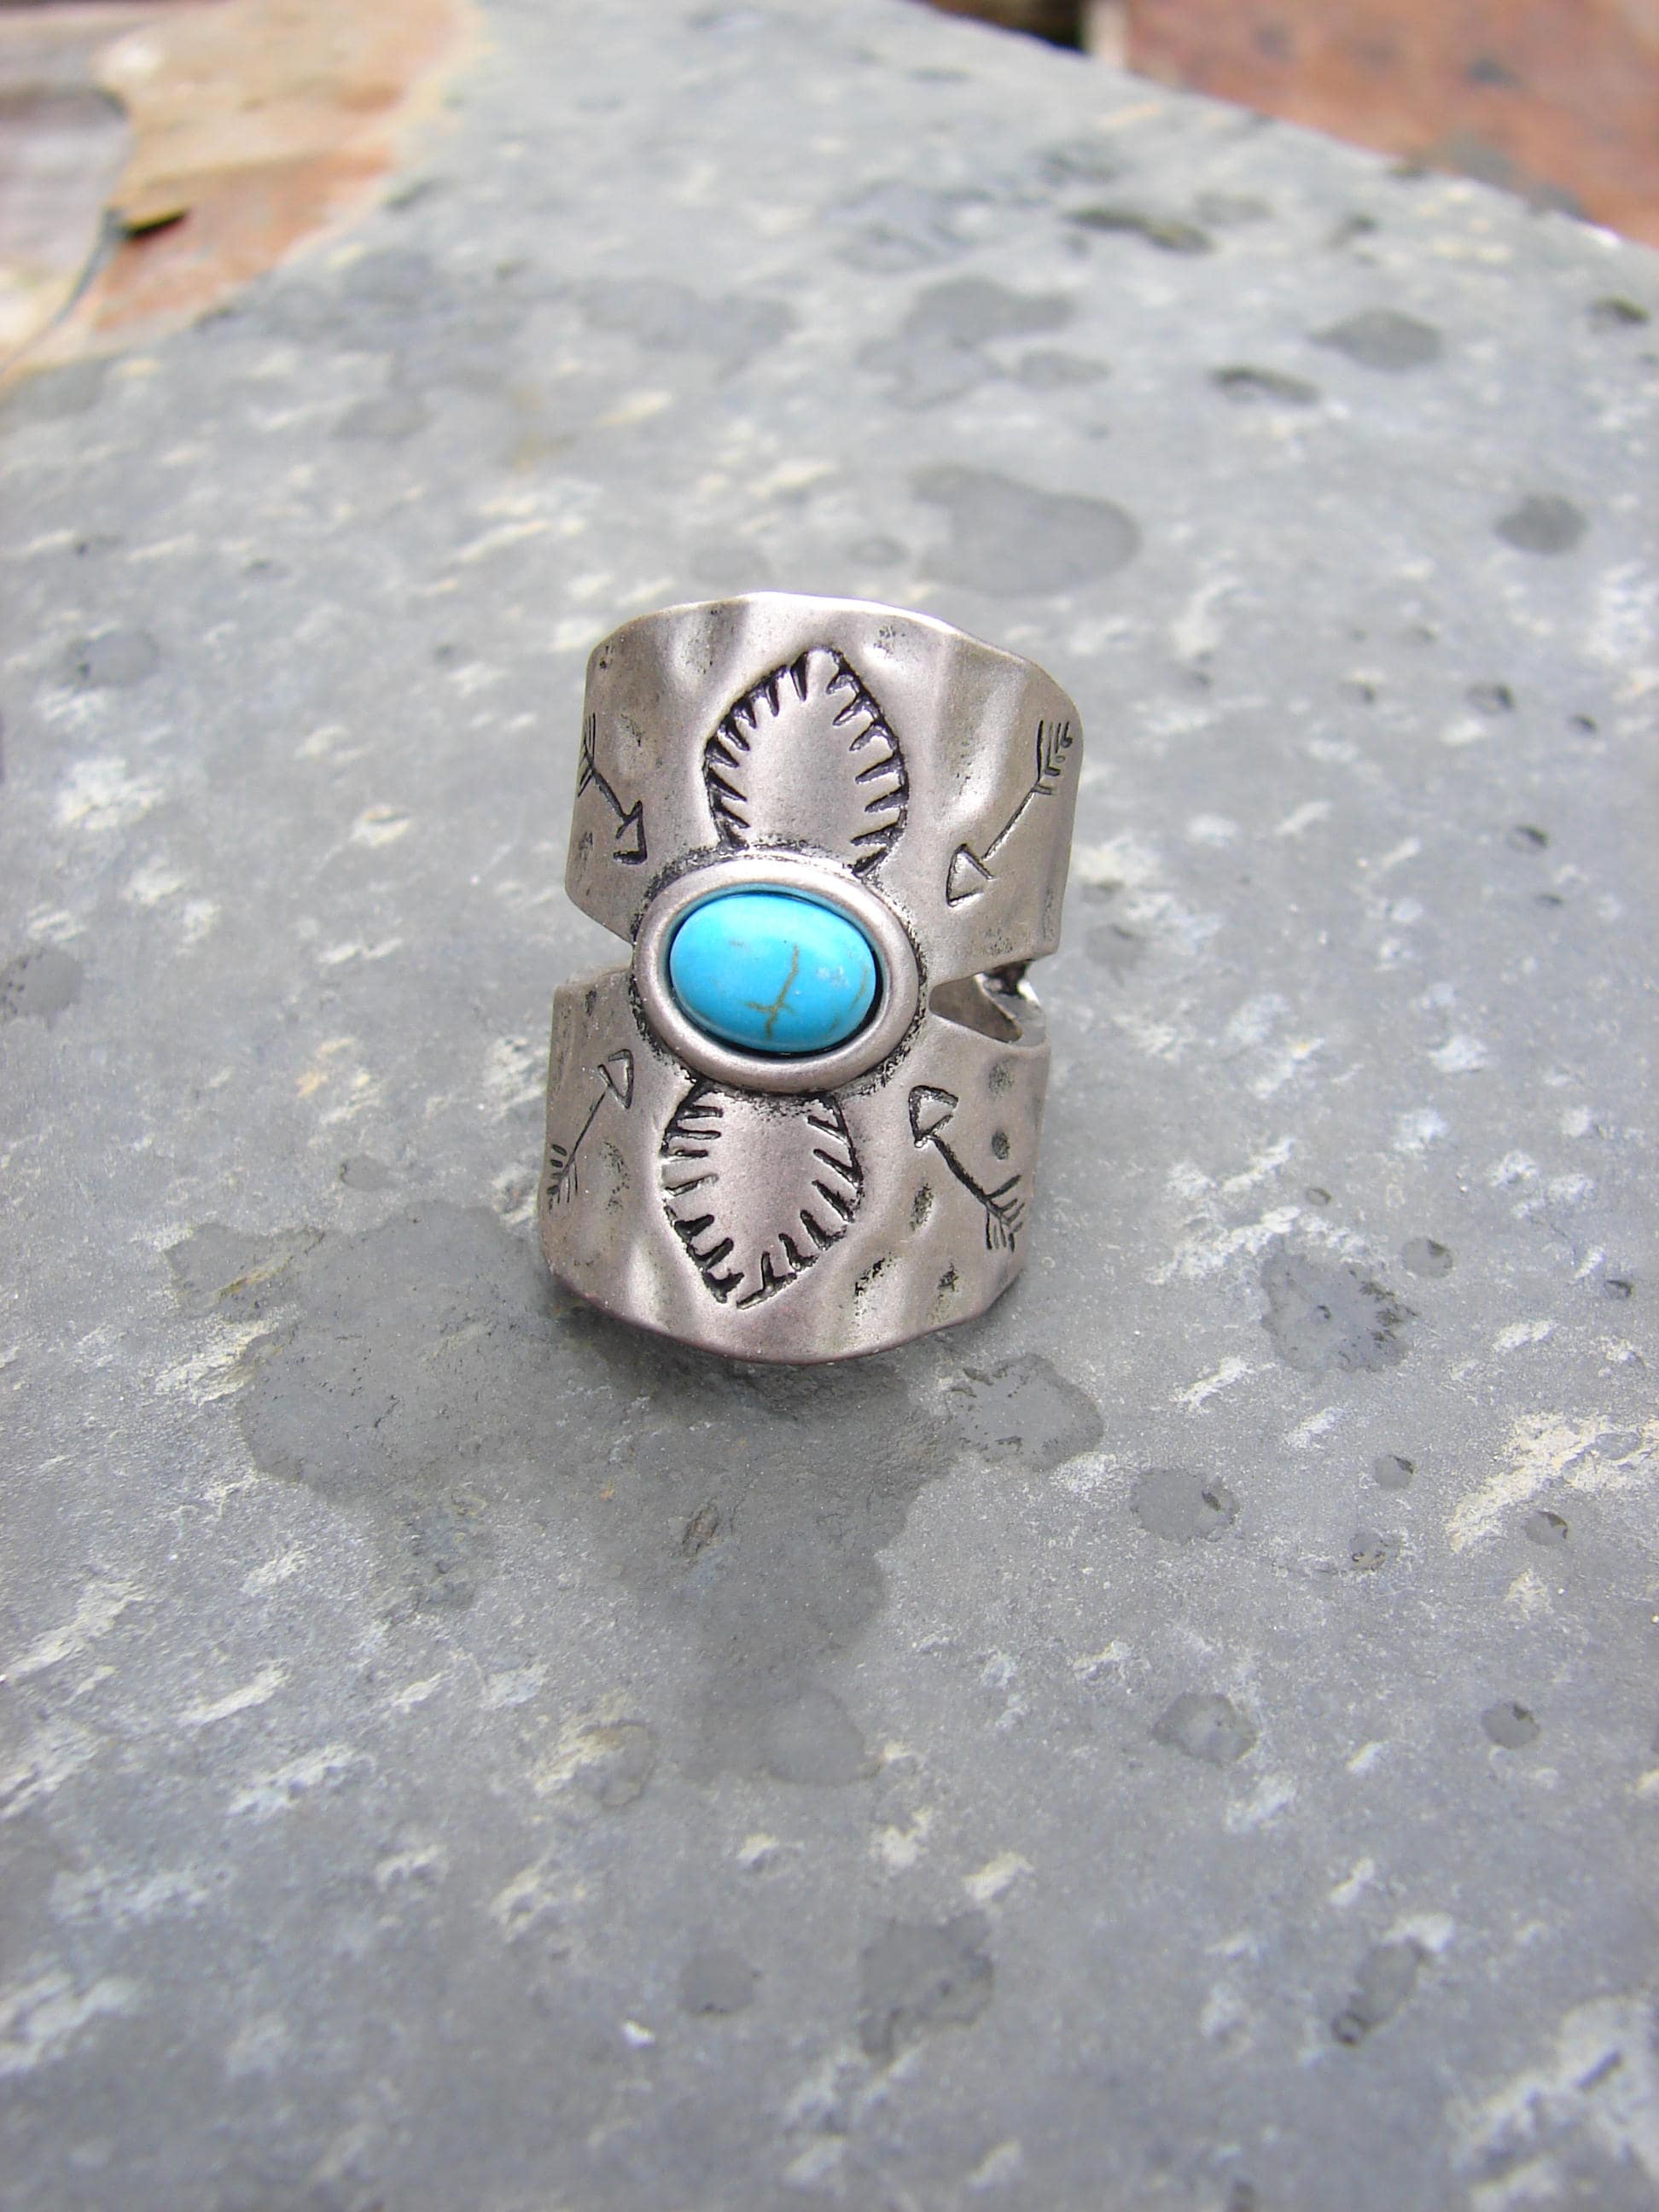 BOHO Turquoise and Silver Ring, Finger Cuff, Southwestern Native American Style Jewelry, Arrow Etched Ring, Valentines Gift for Sister